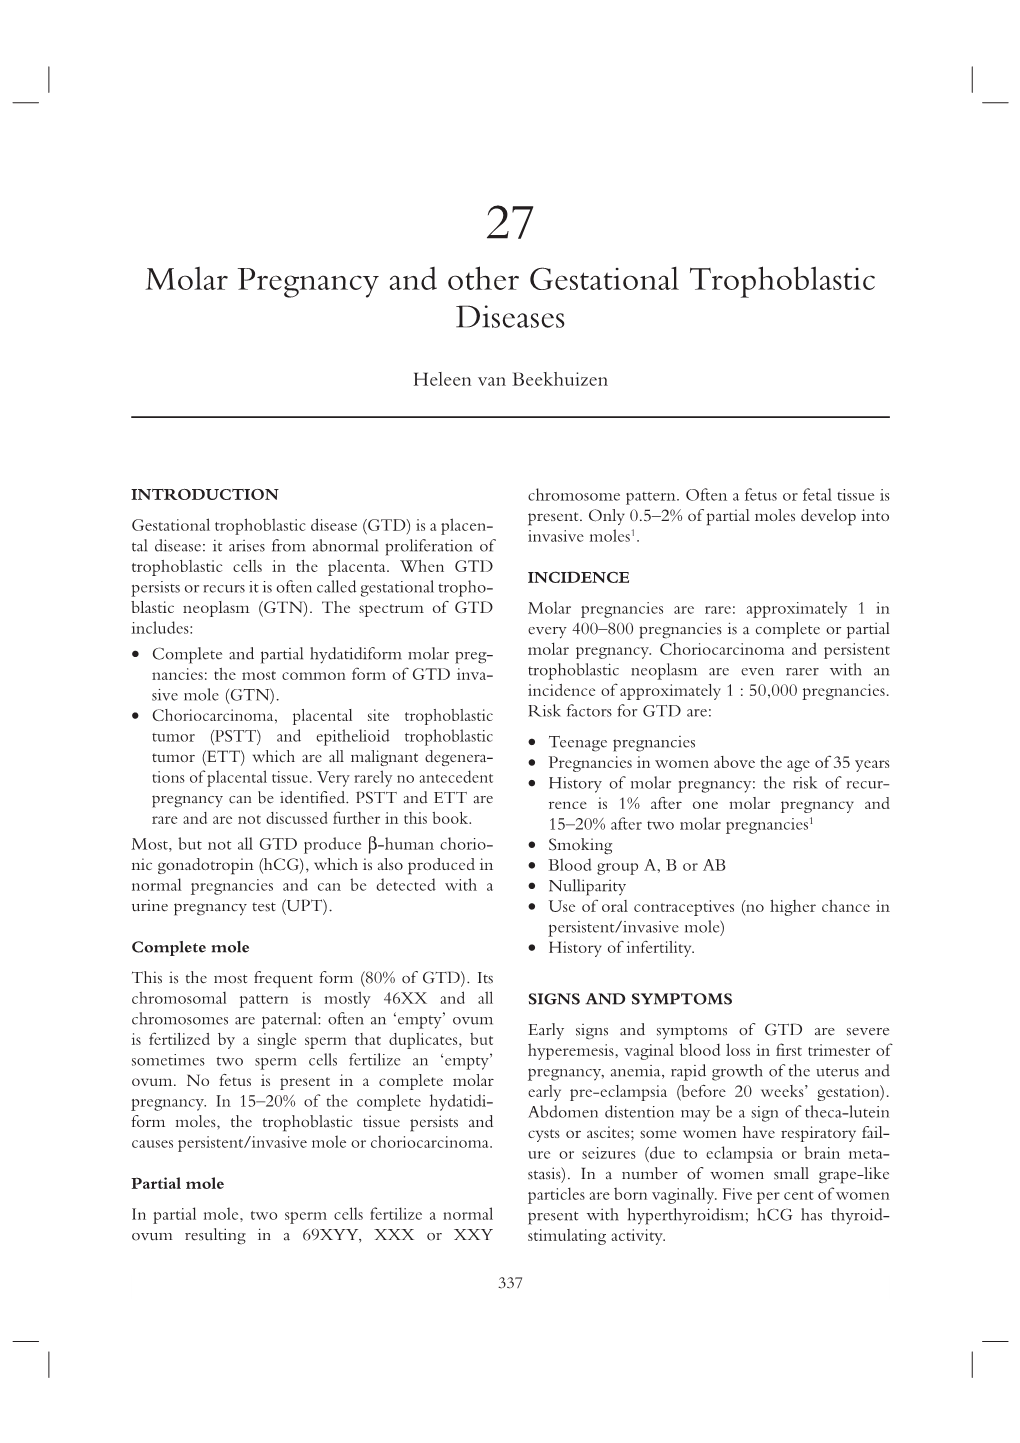 Molar Pregnancy and Other Gestational Trophoblastic Diseases